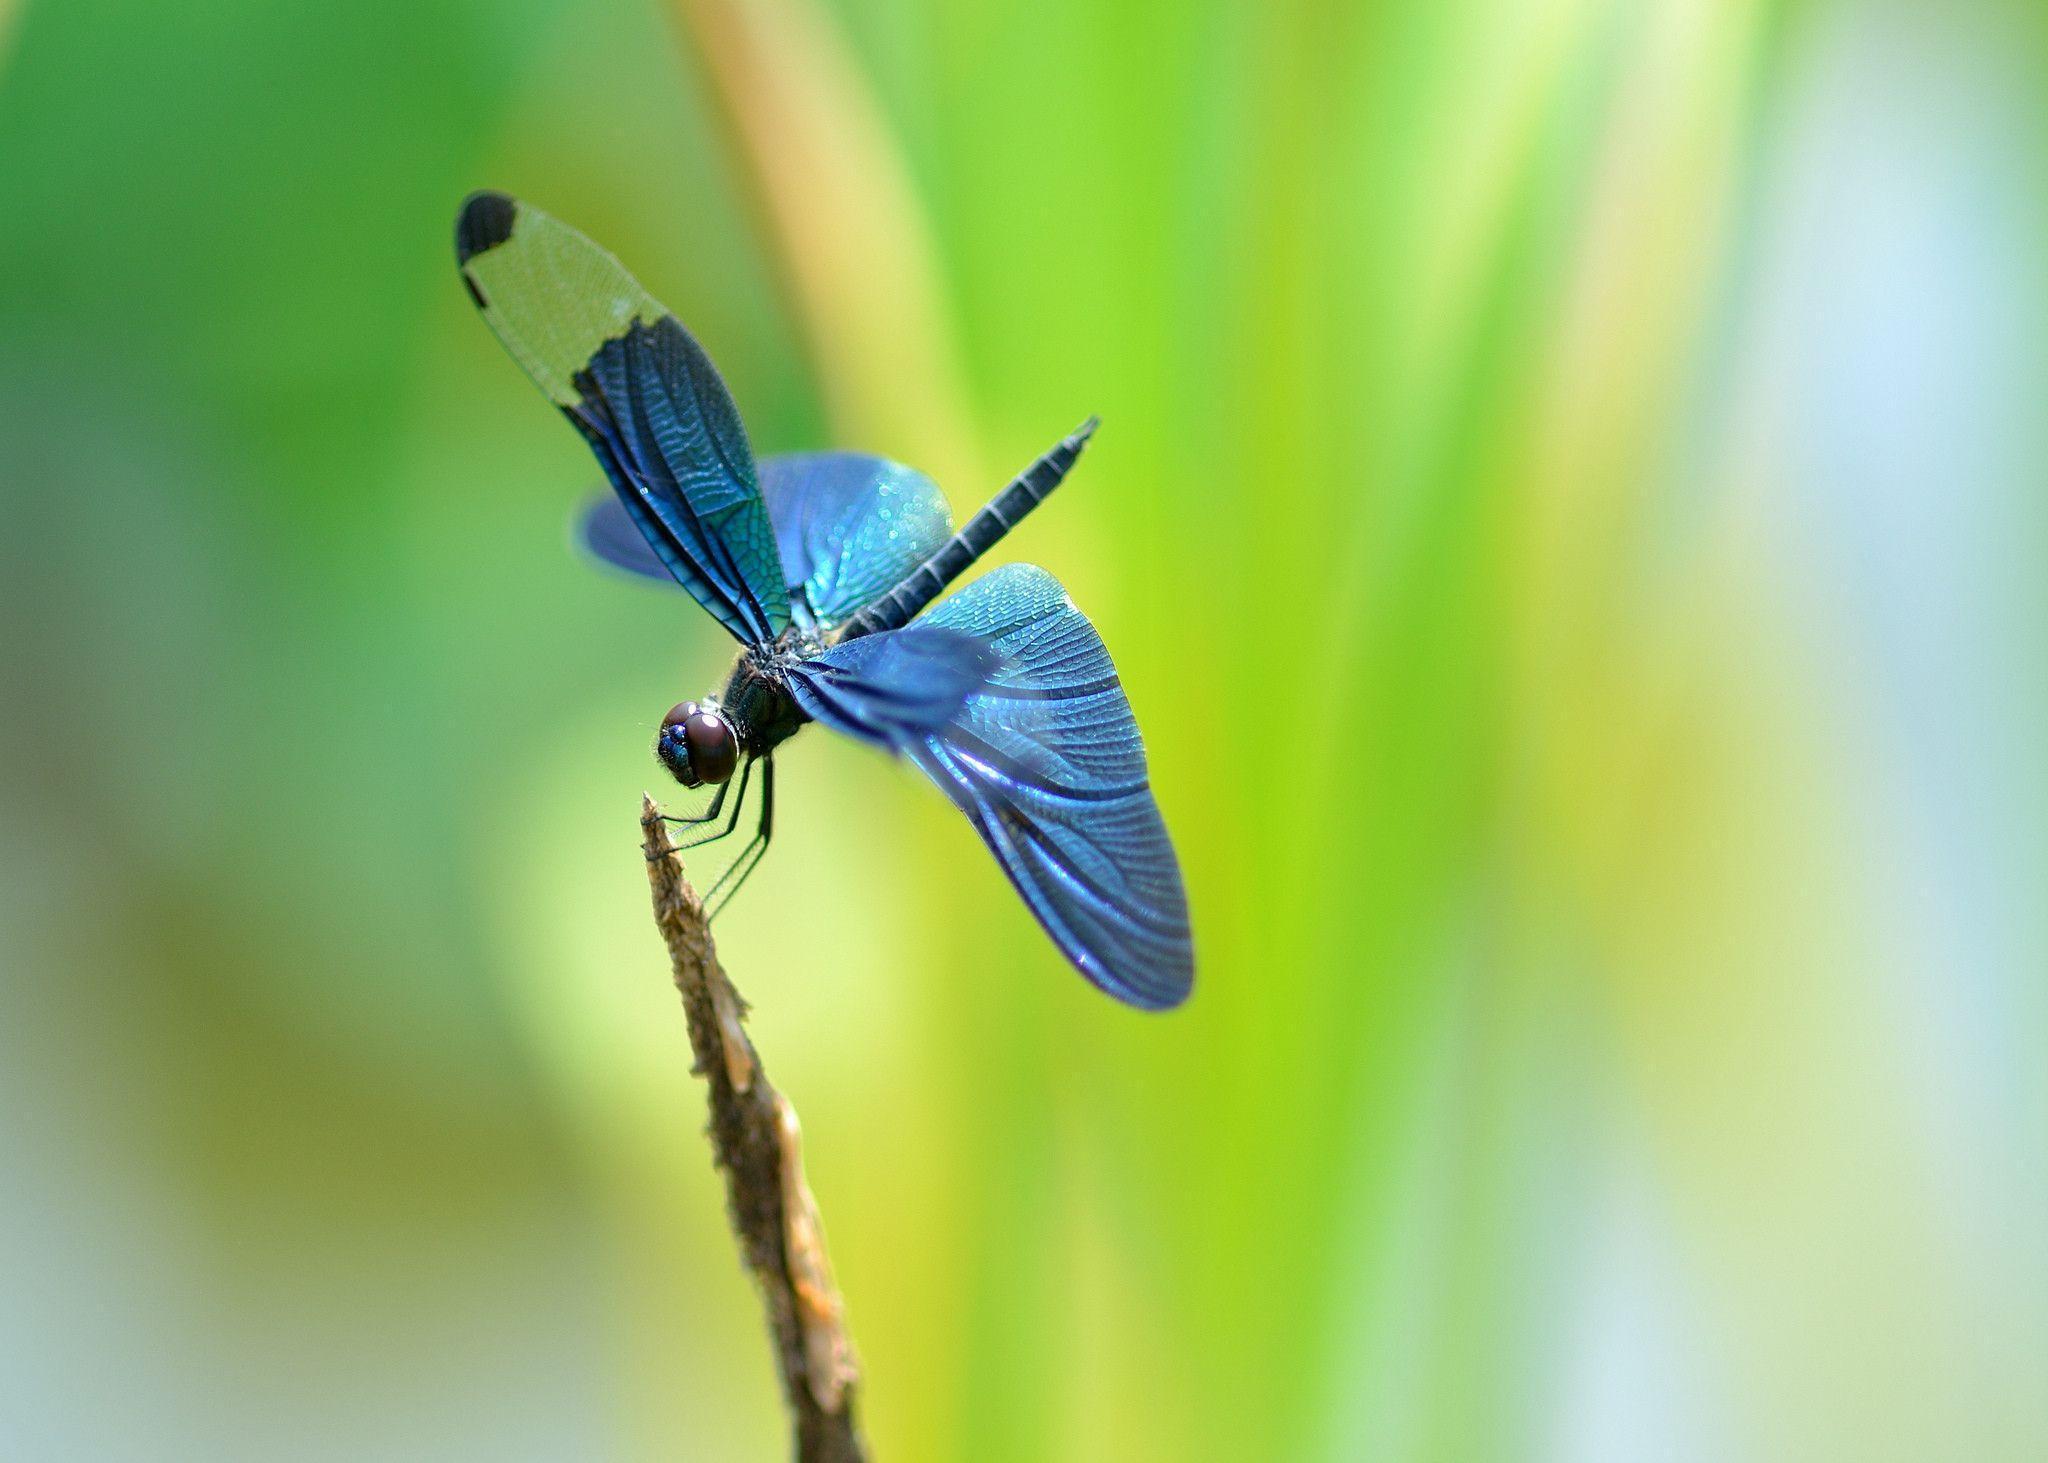 Download Dragonfly Wallpaper 18103 2048x1463 px High Resolution